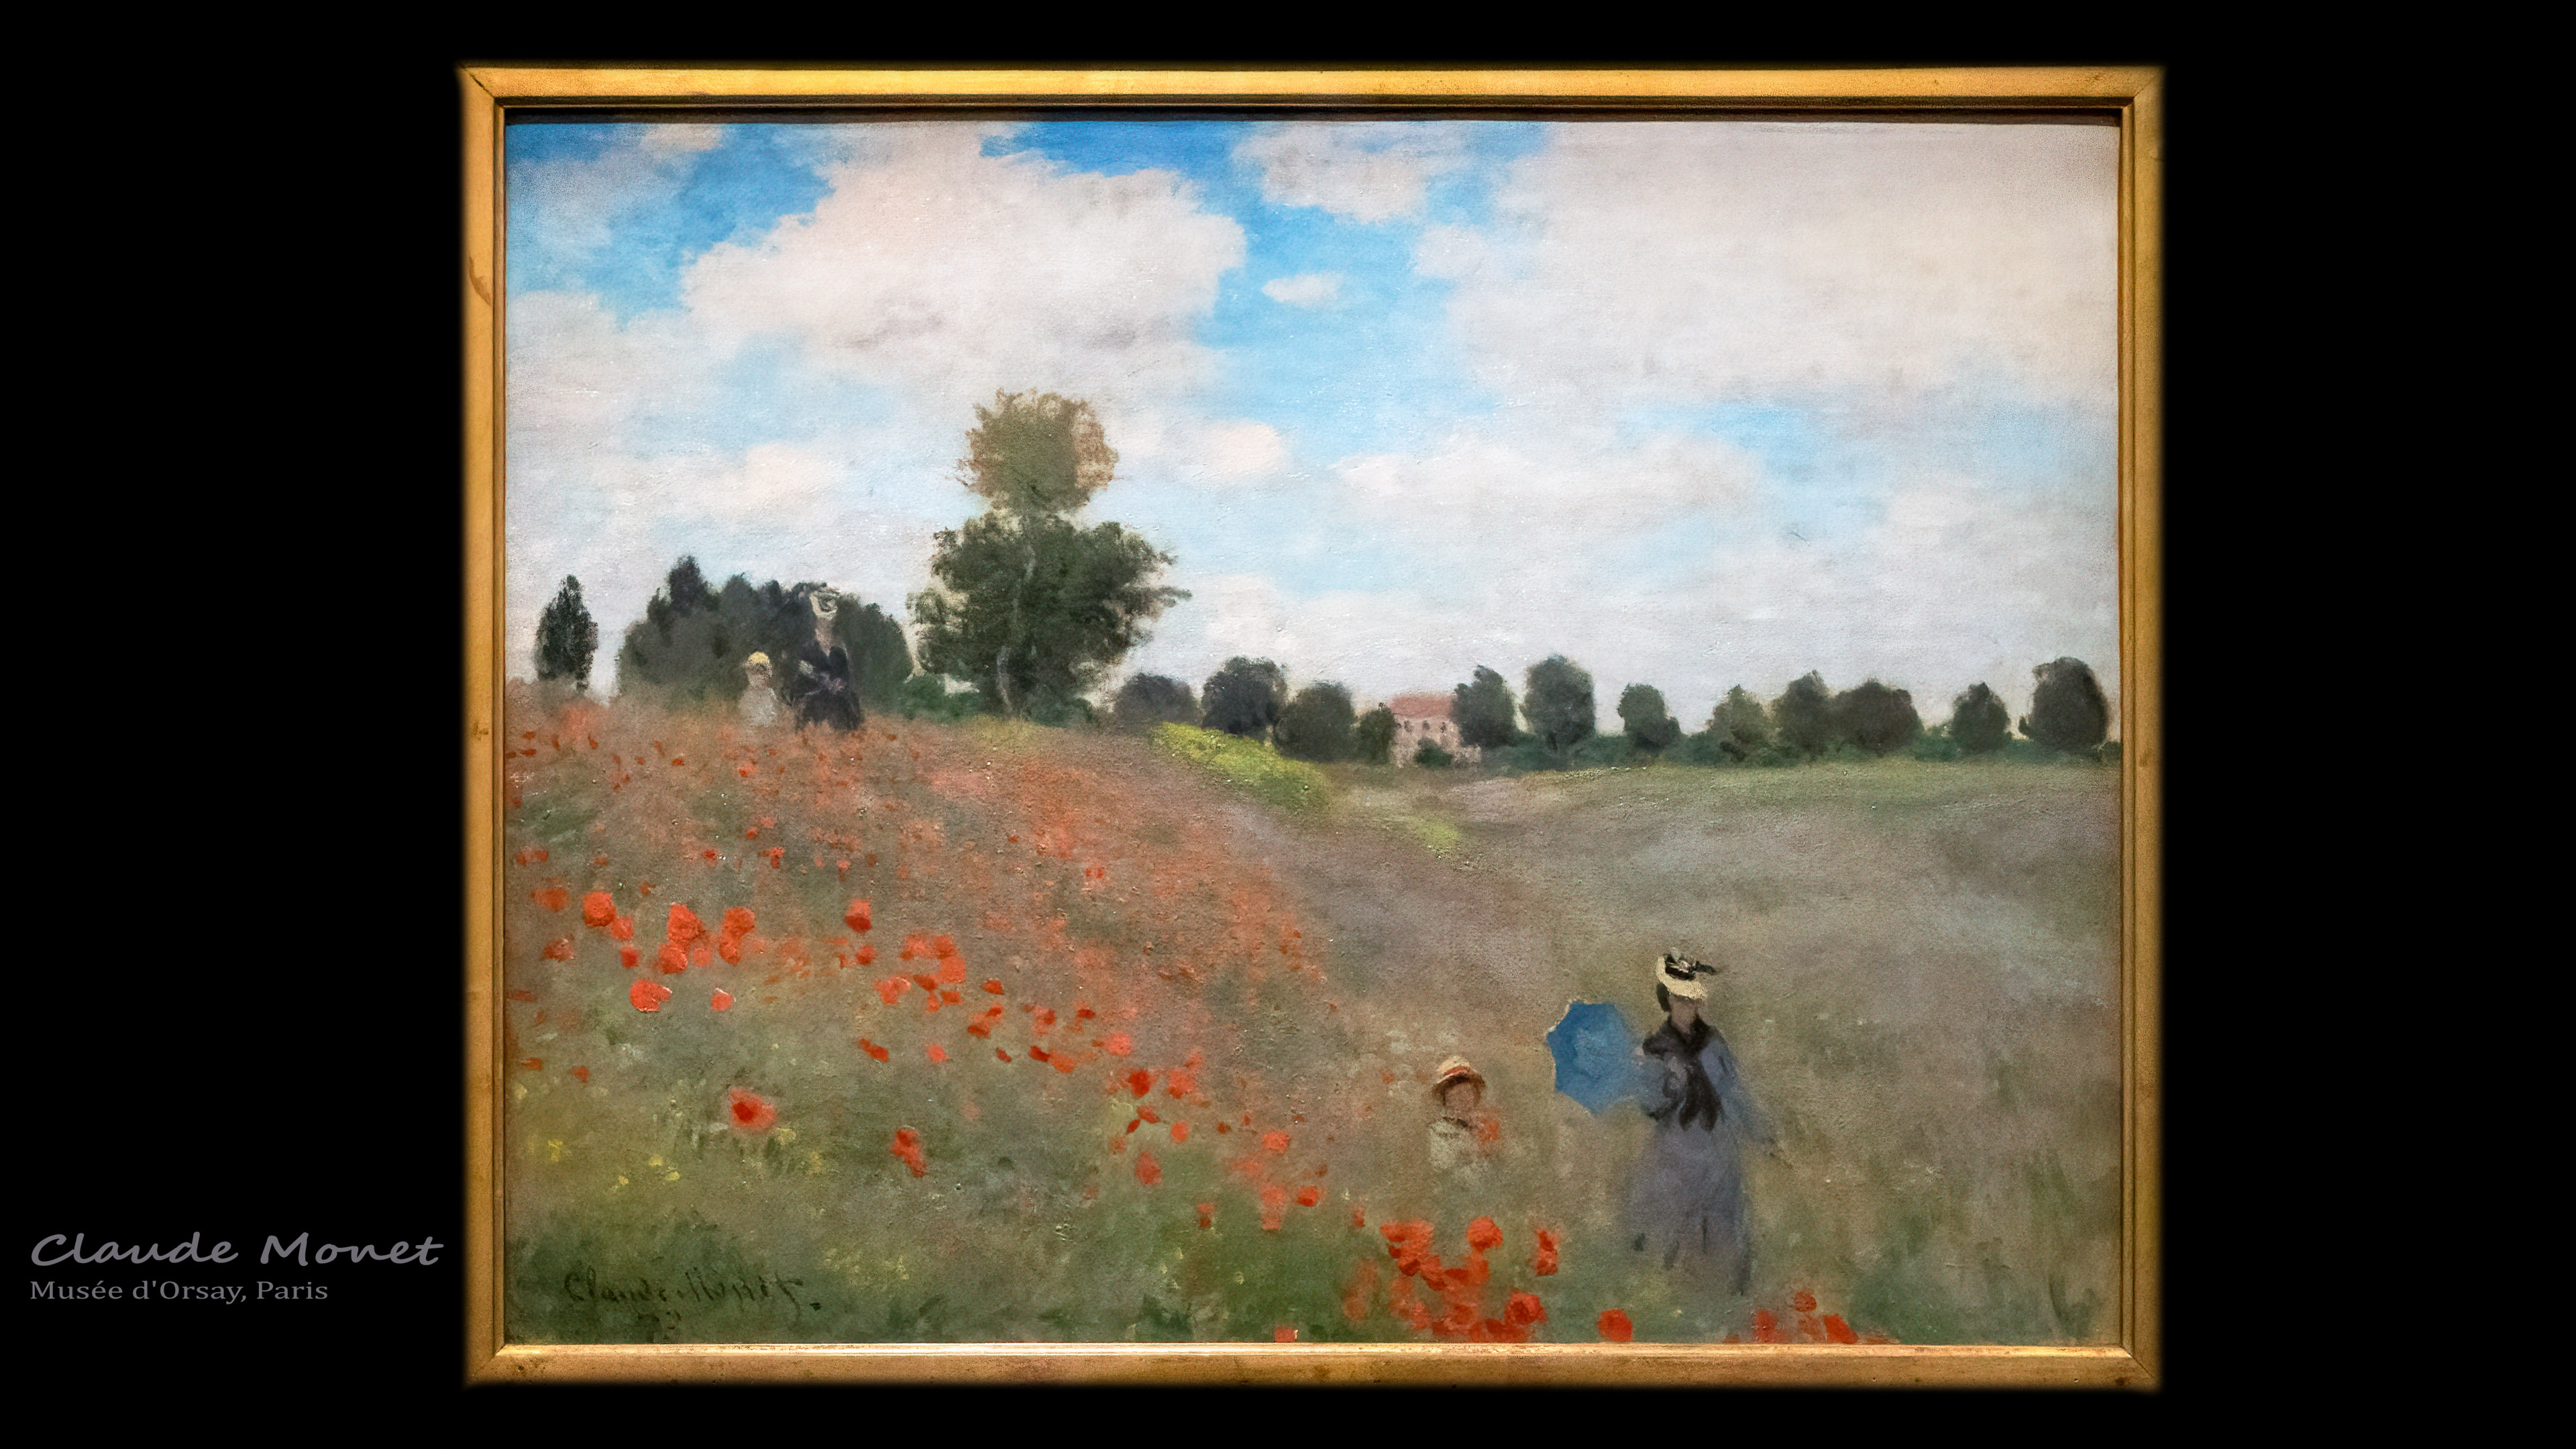 Feel the vibrant hues of Wild Poppies, near Argenteuil, as Monet's HD wallpaper captures the lively beauty of a poppy-filled landscape.